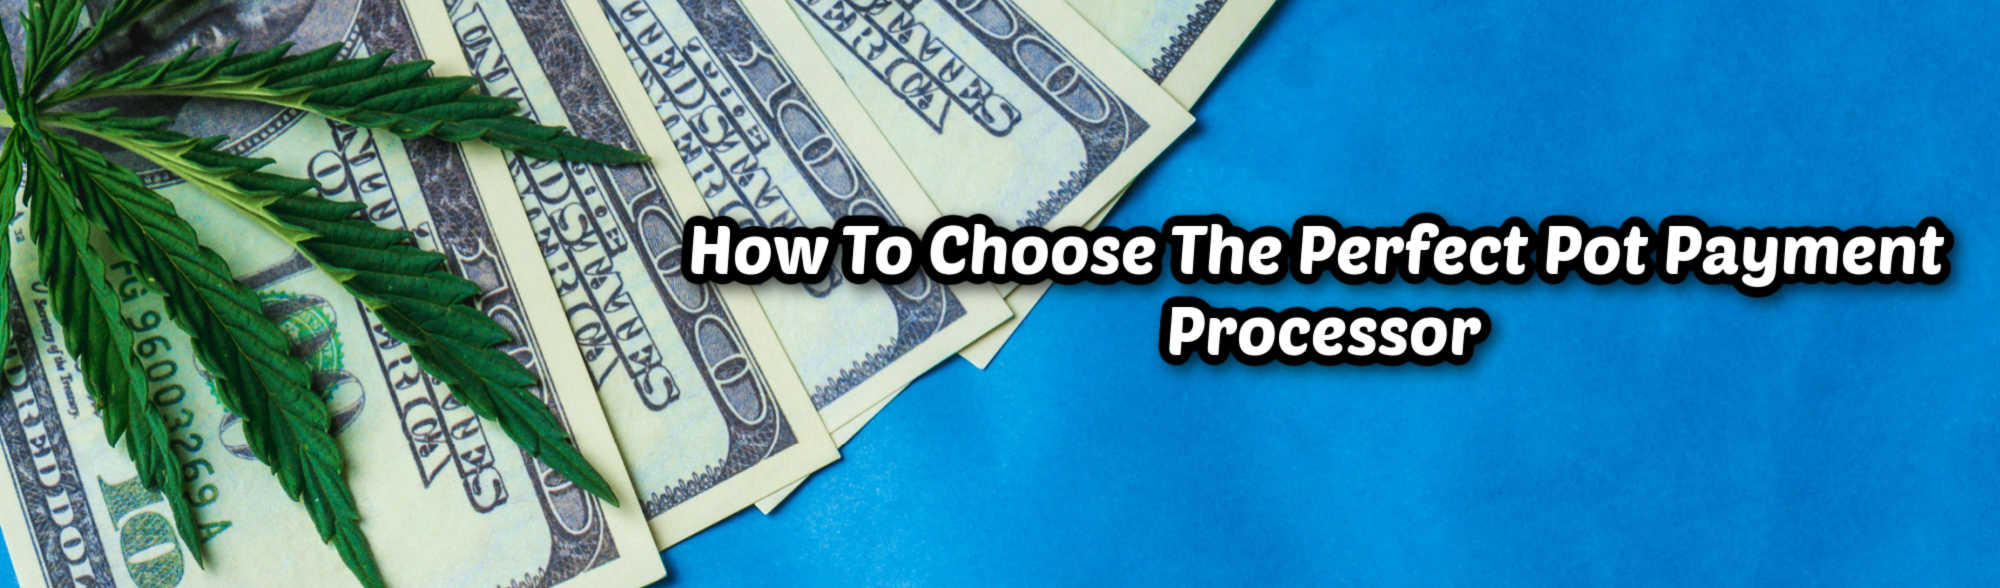 image of how to choose the perfect pot payment processor